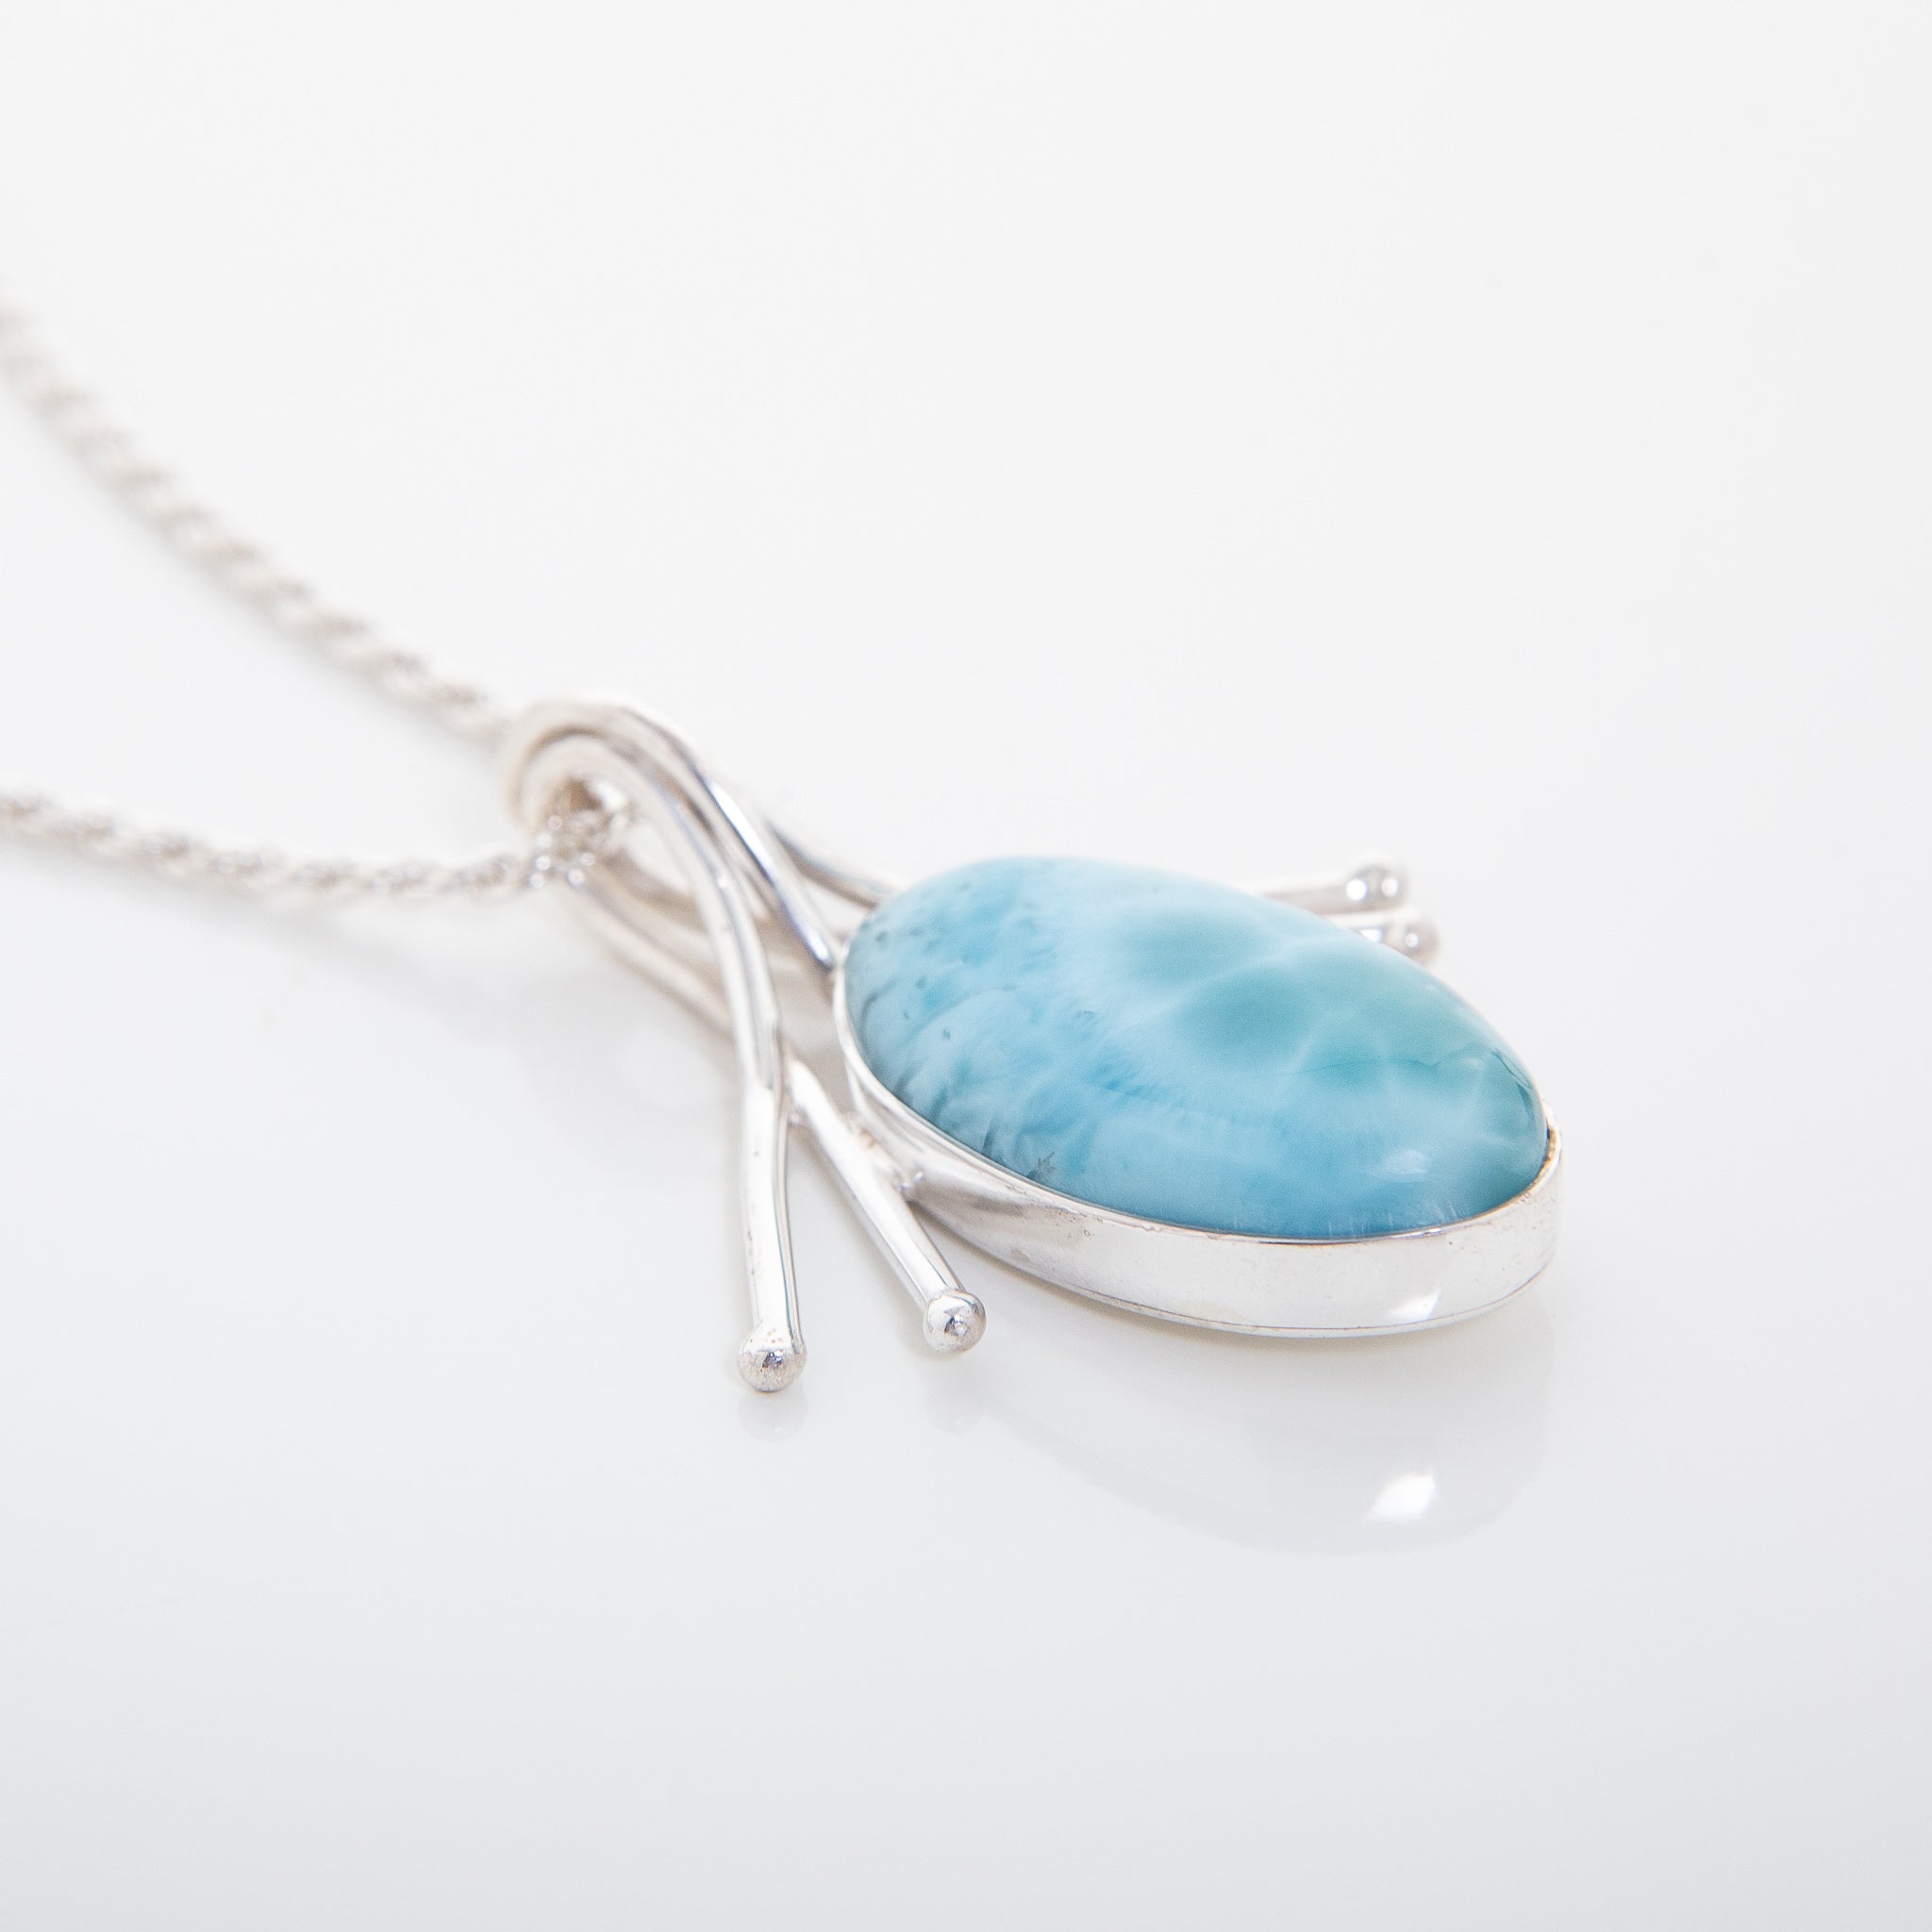 Meet the Carol pendant. Its gorgeous Larimar blue patterns sets it apart from the rest, adding a dash of class to your collection. A must-have for any fashion-forward individual, this timeless piece is sure to leave a lasting impression.